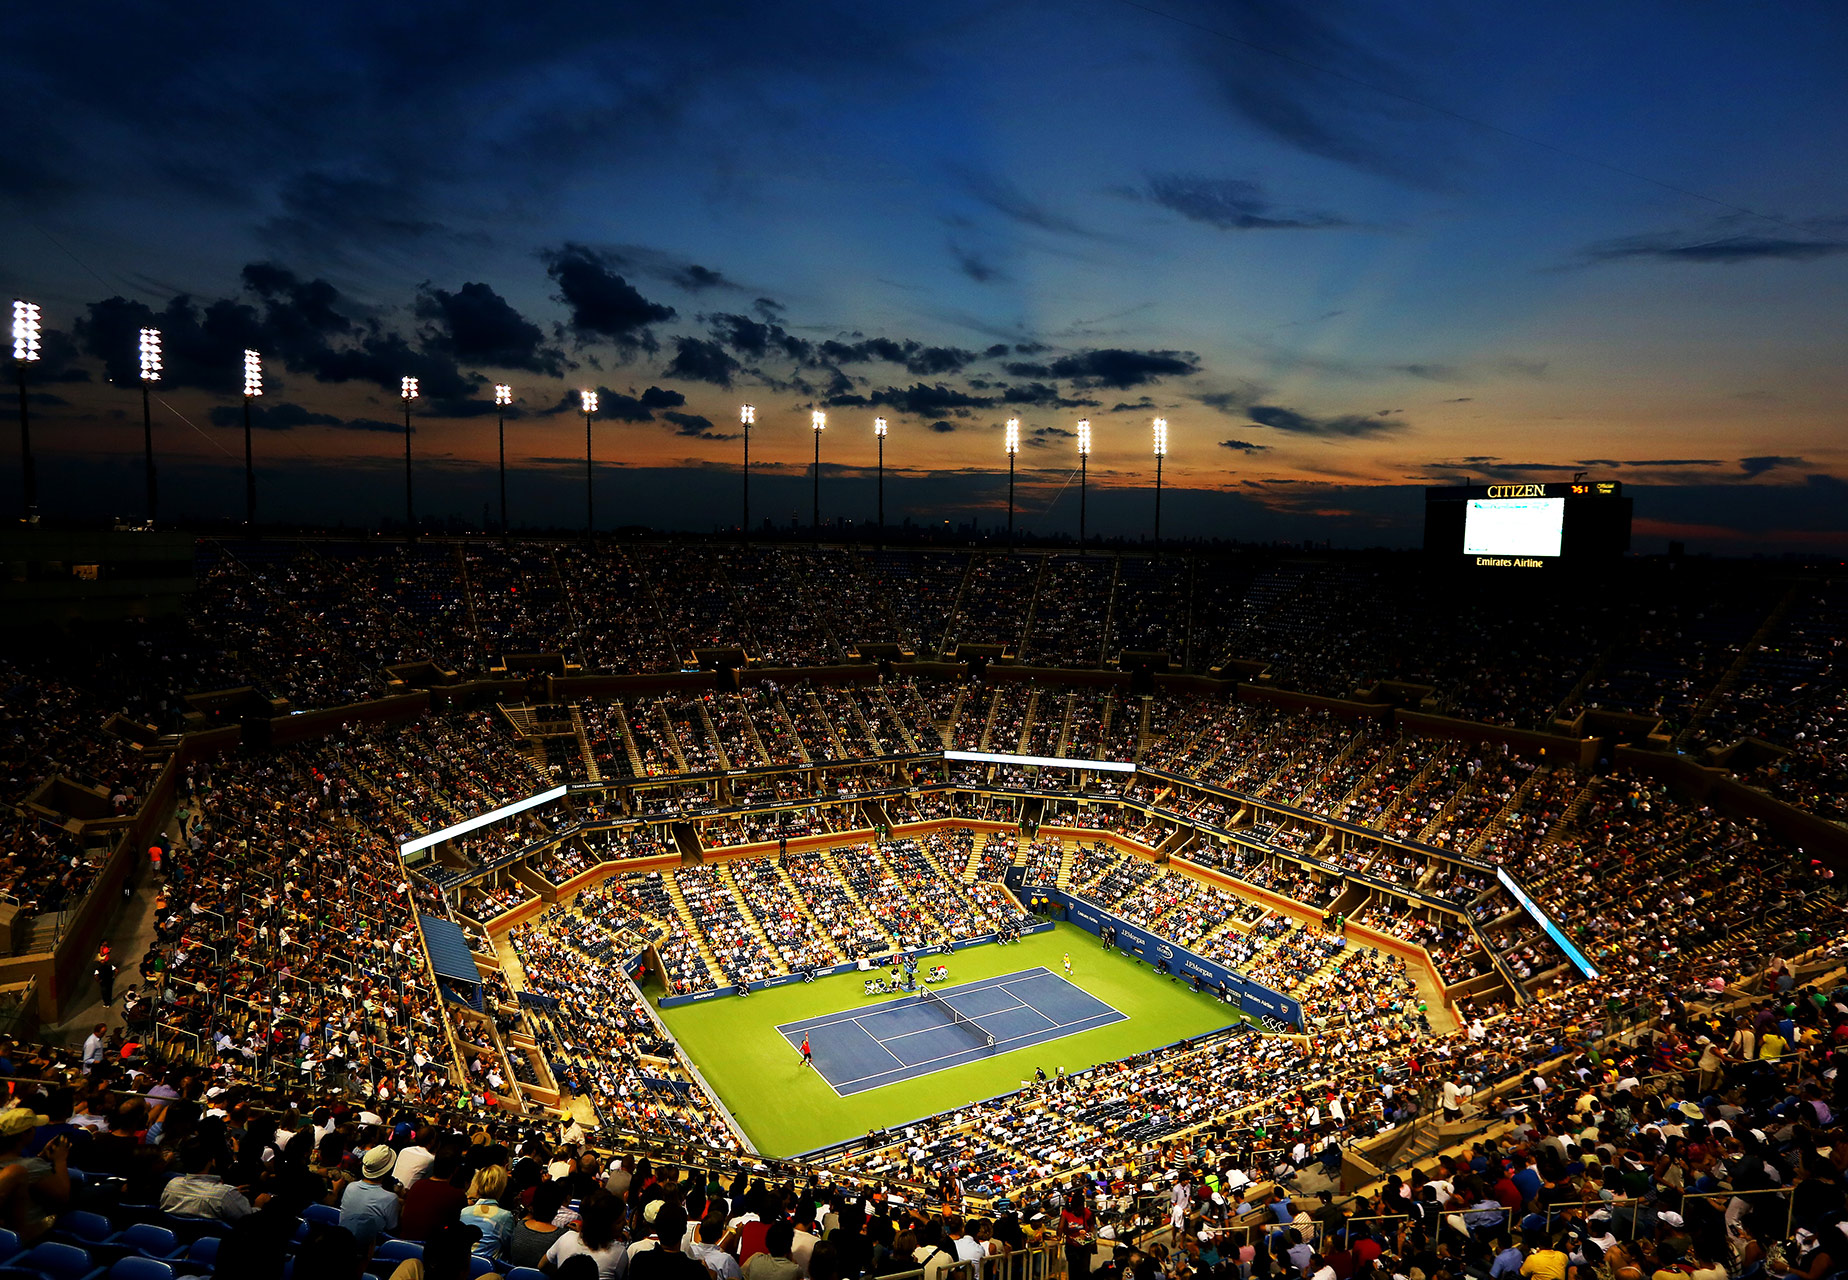 US Open-US Open Tennis Championship: Session 22 - Men's Semifinals 1 tickets price and order